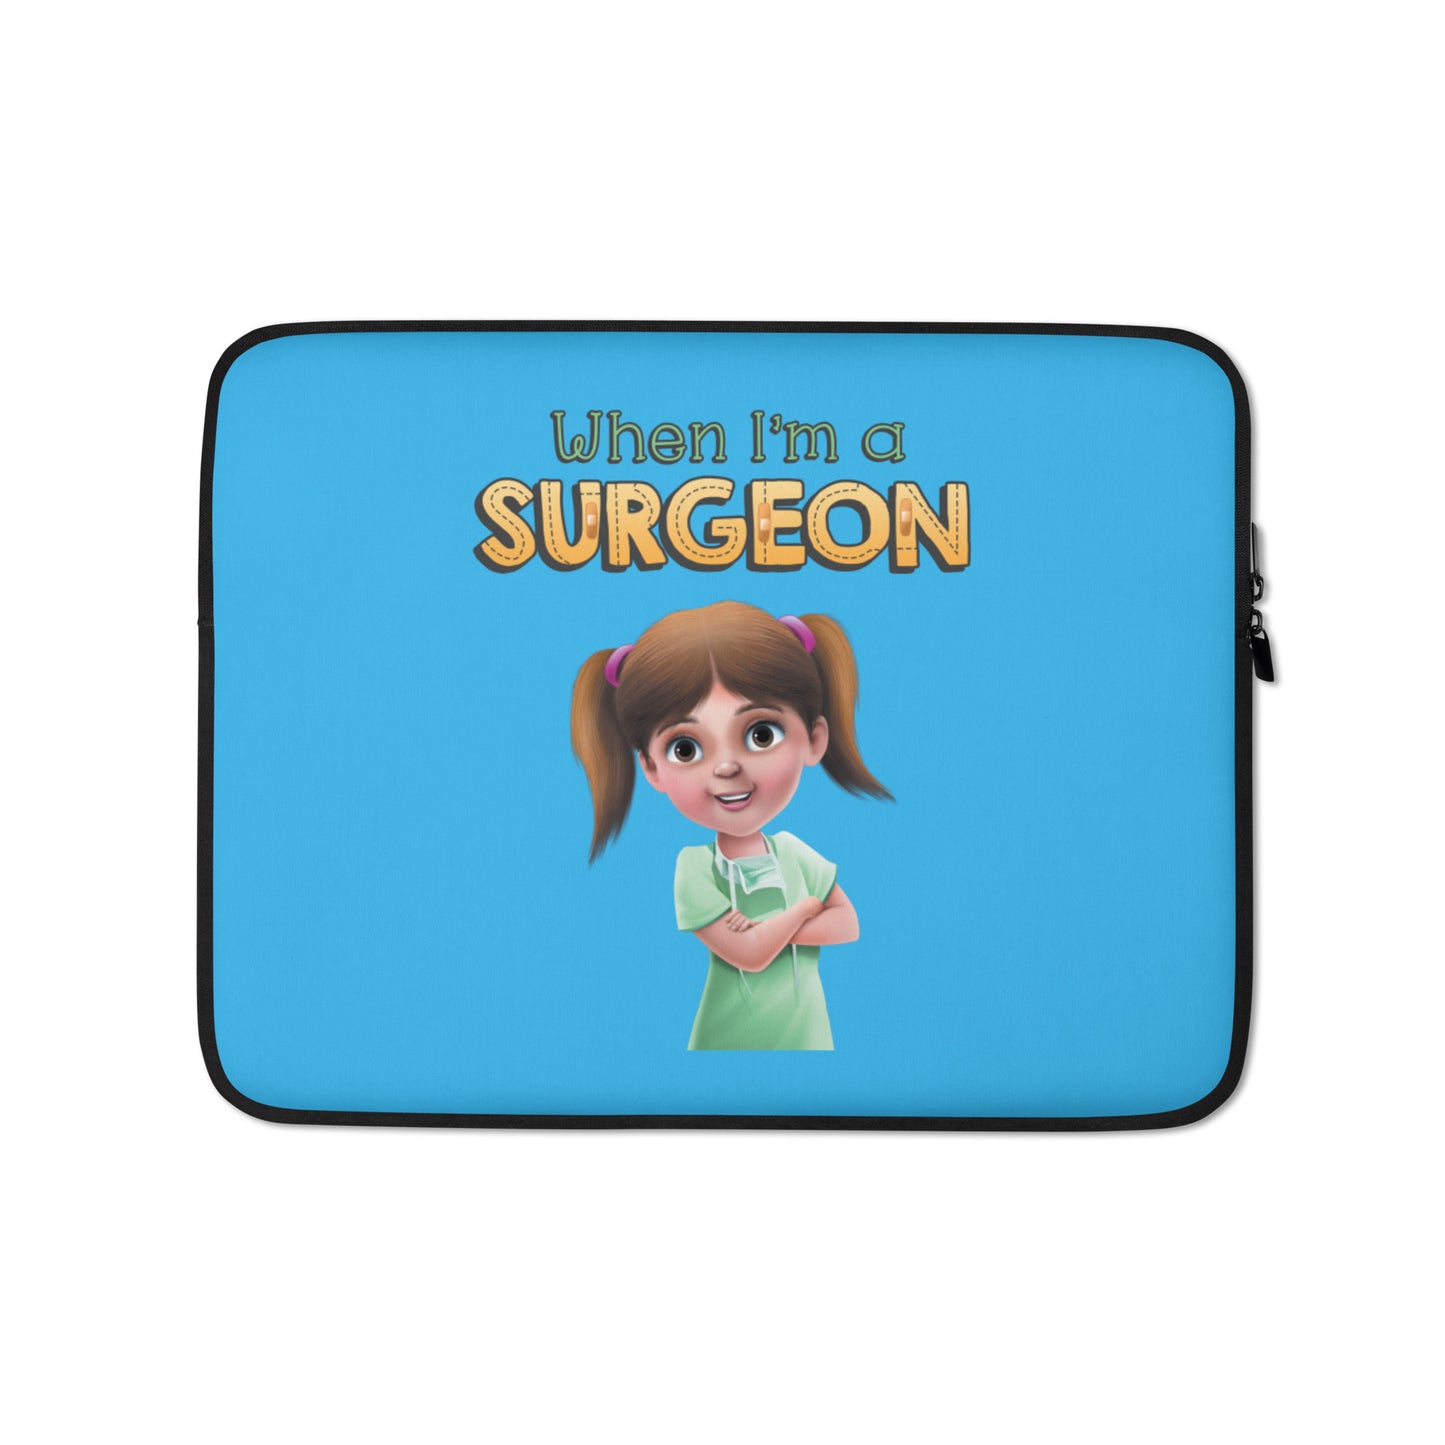 The best, cute, fun laptop sleeve bag for a doctor or future surgeon.